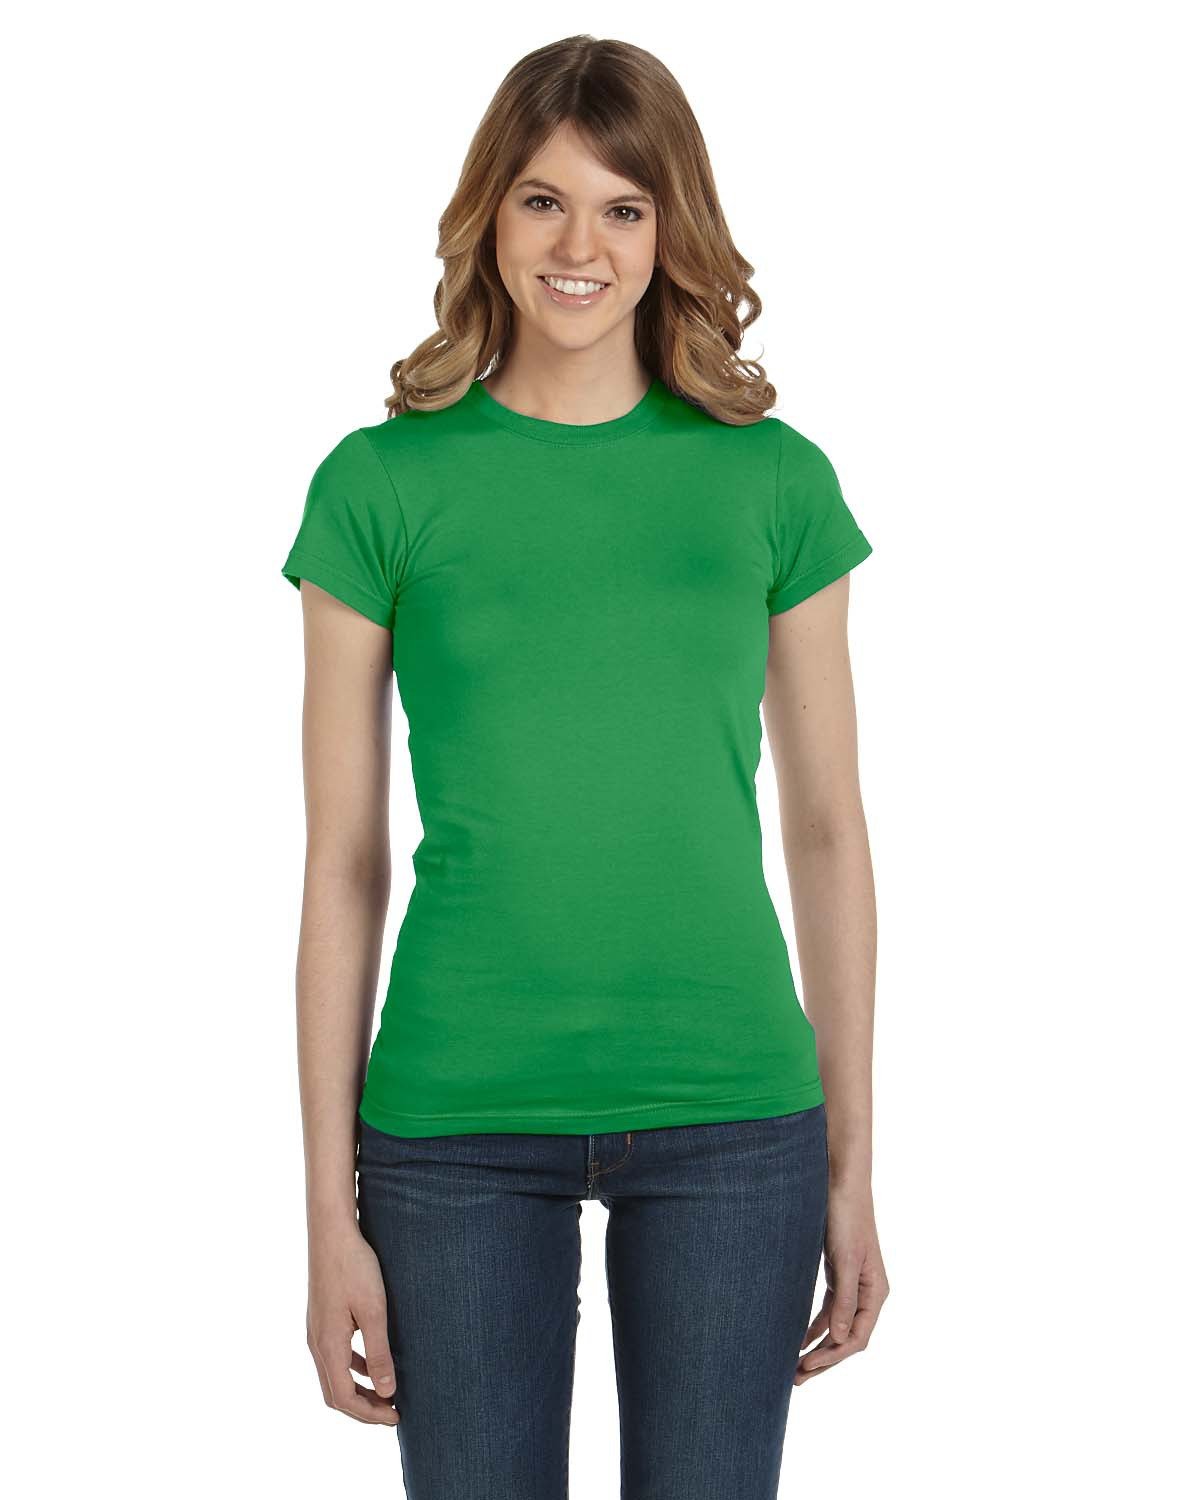 Anvil Ladies' Lightweight Fitted T-Shirt GREEN APPLE 